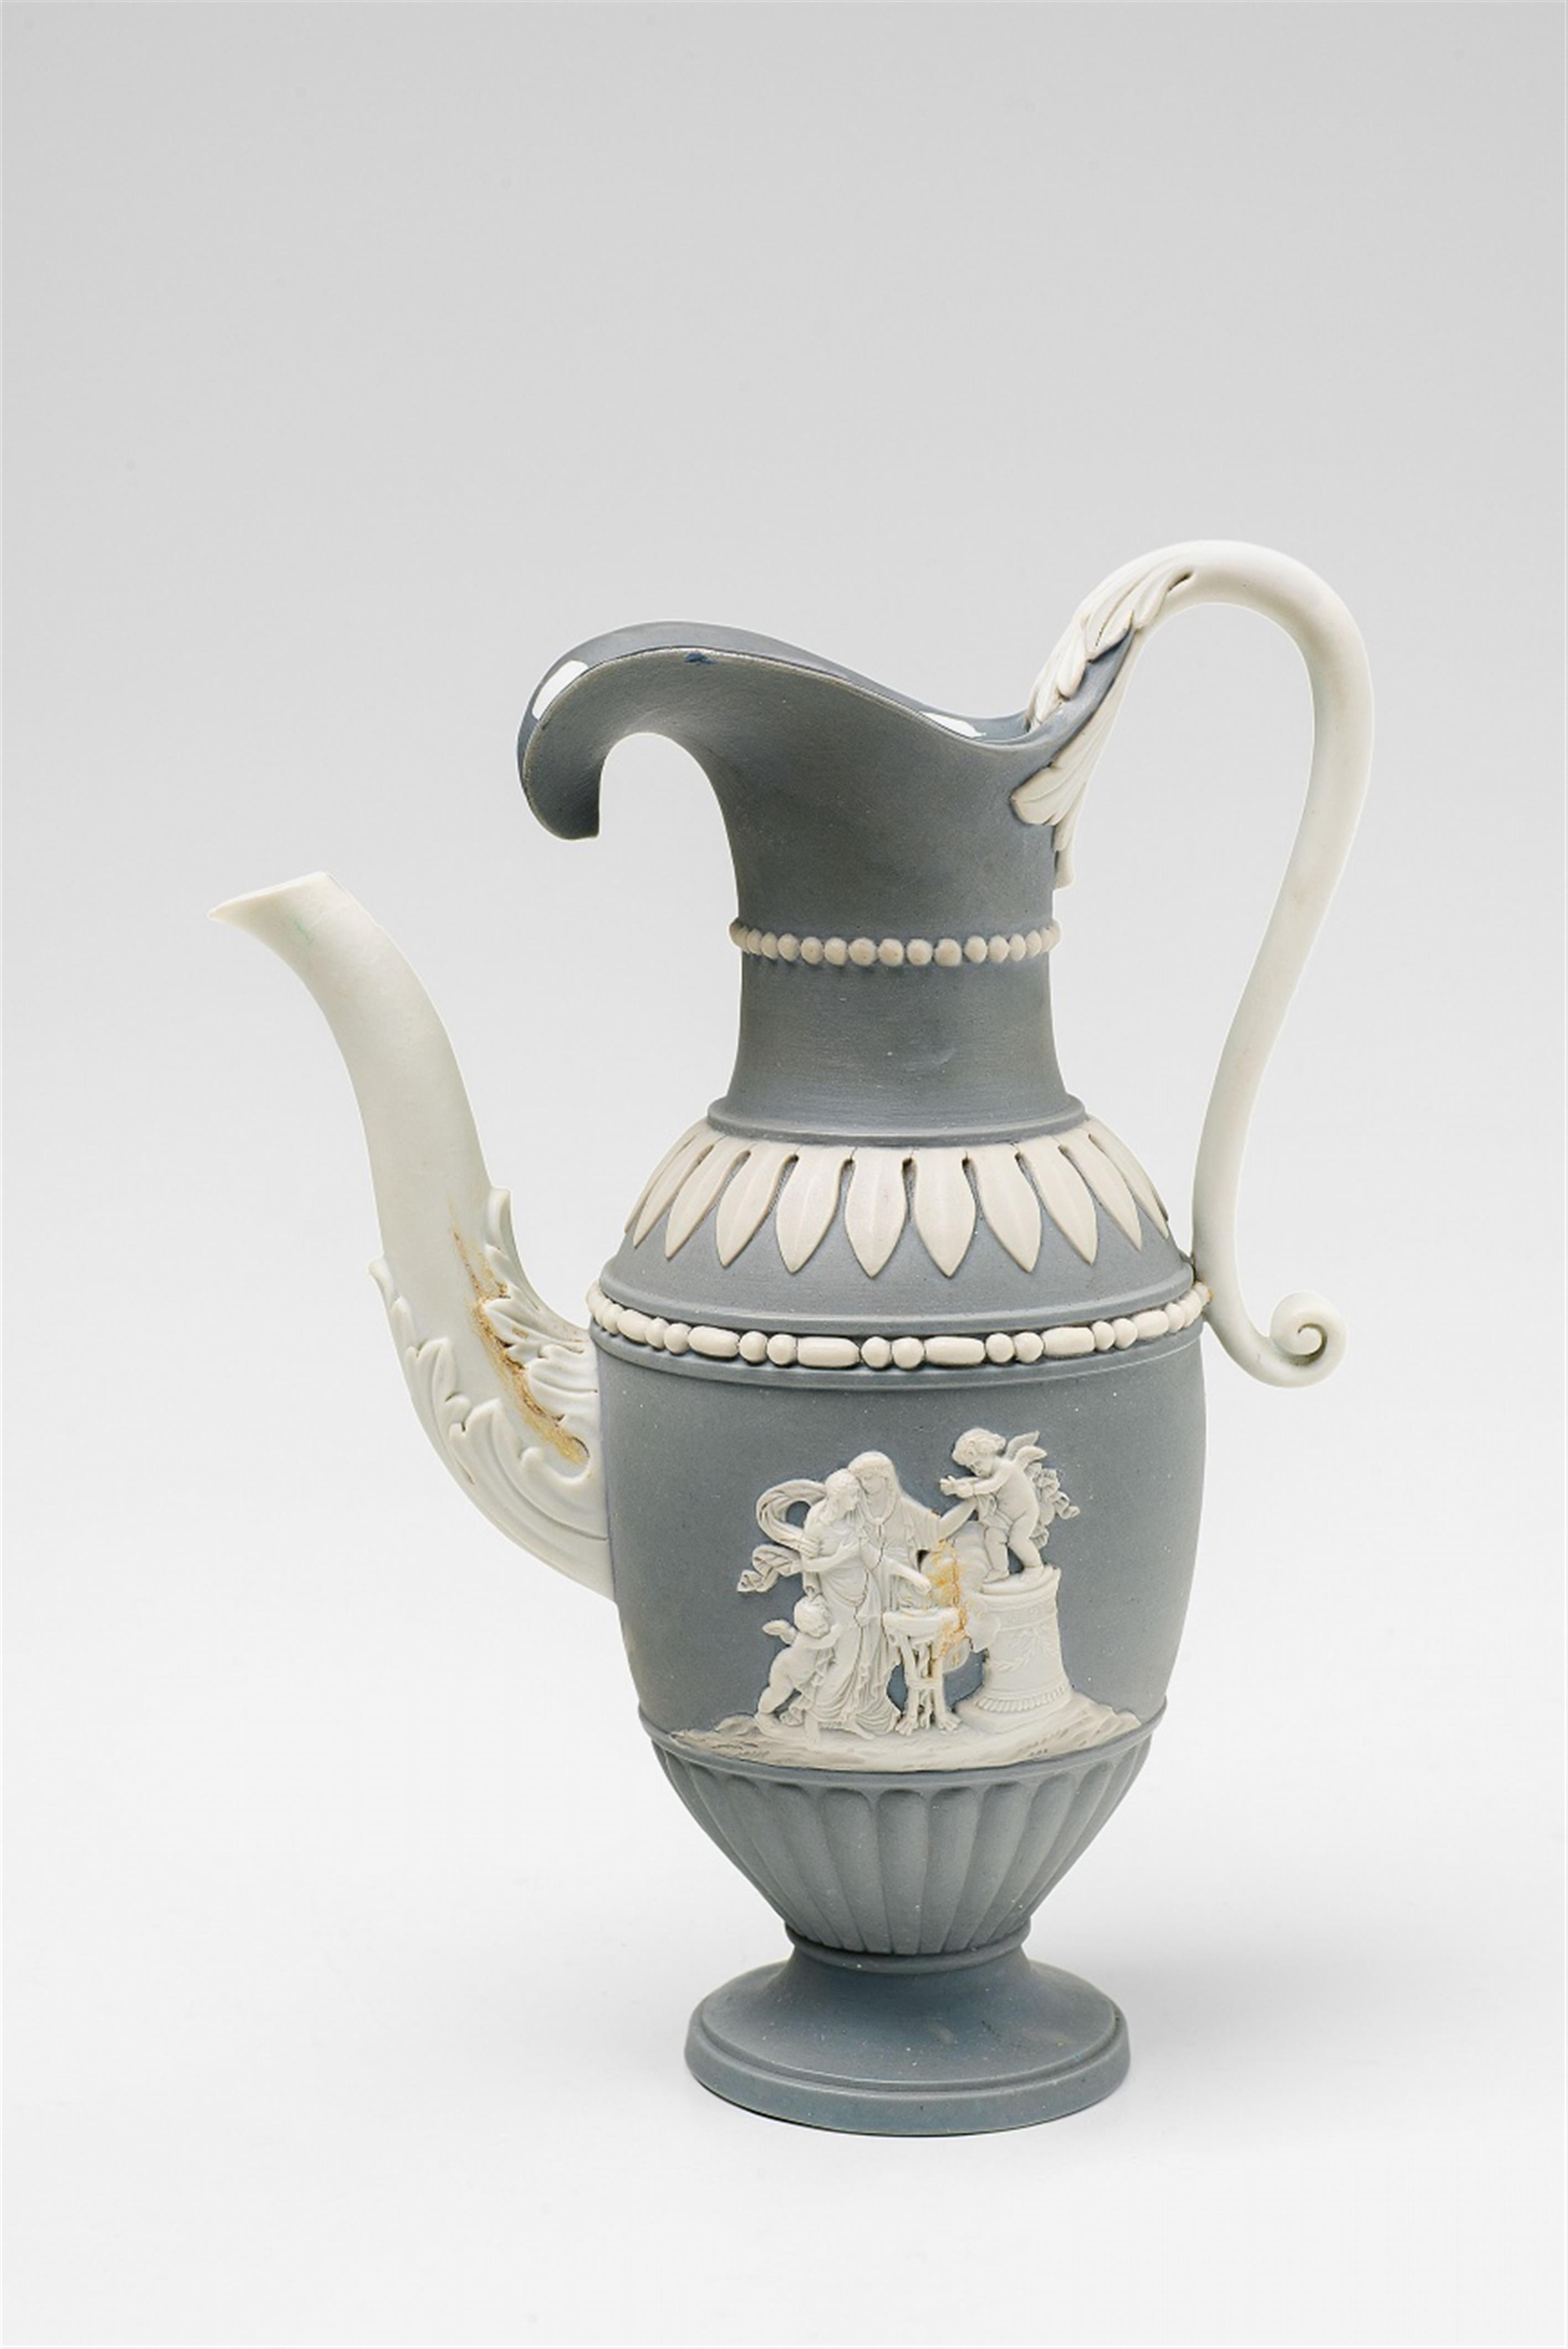 A rare Meissen porcelain pitcher with Neoclassical offering scenes - image-1